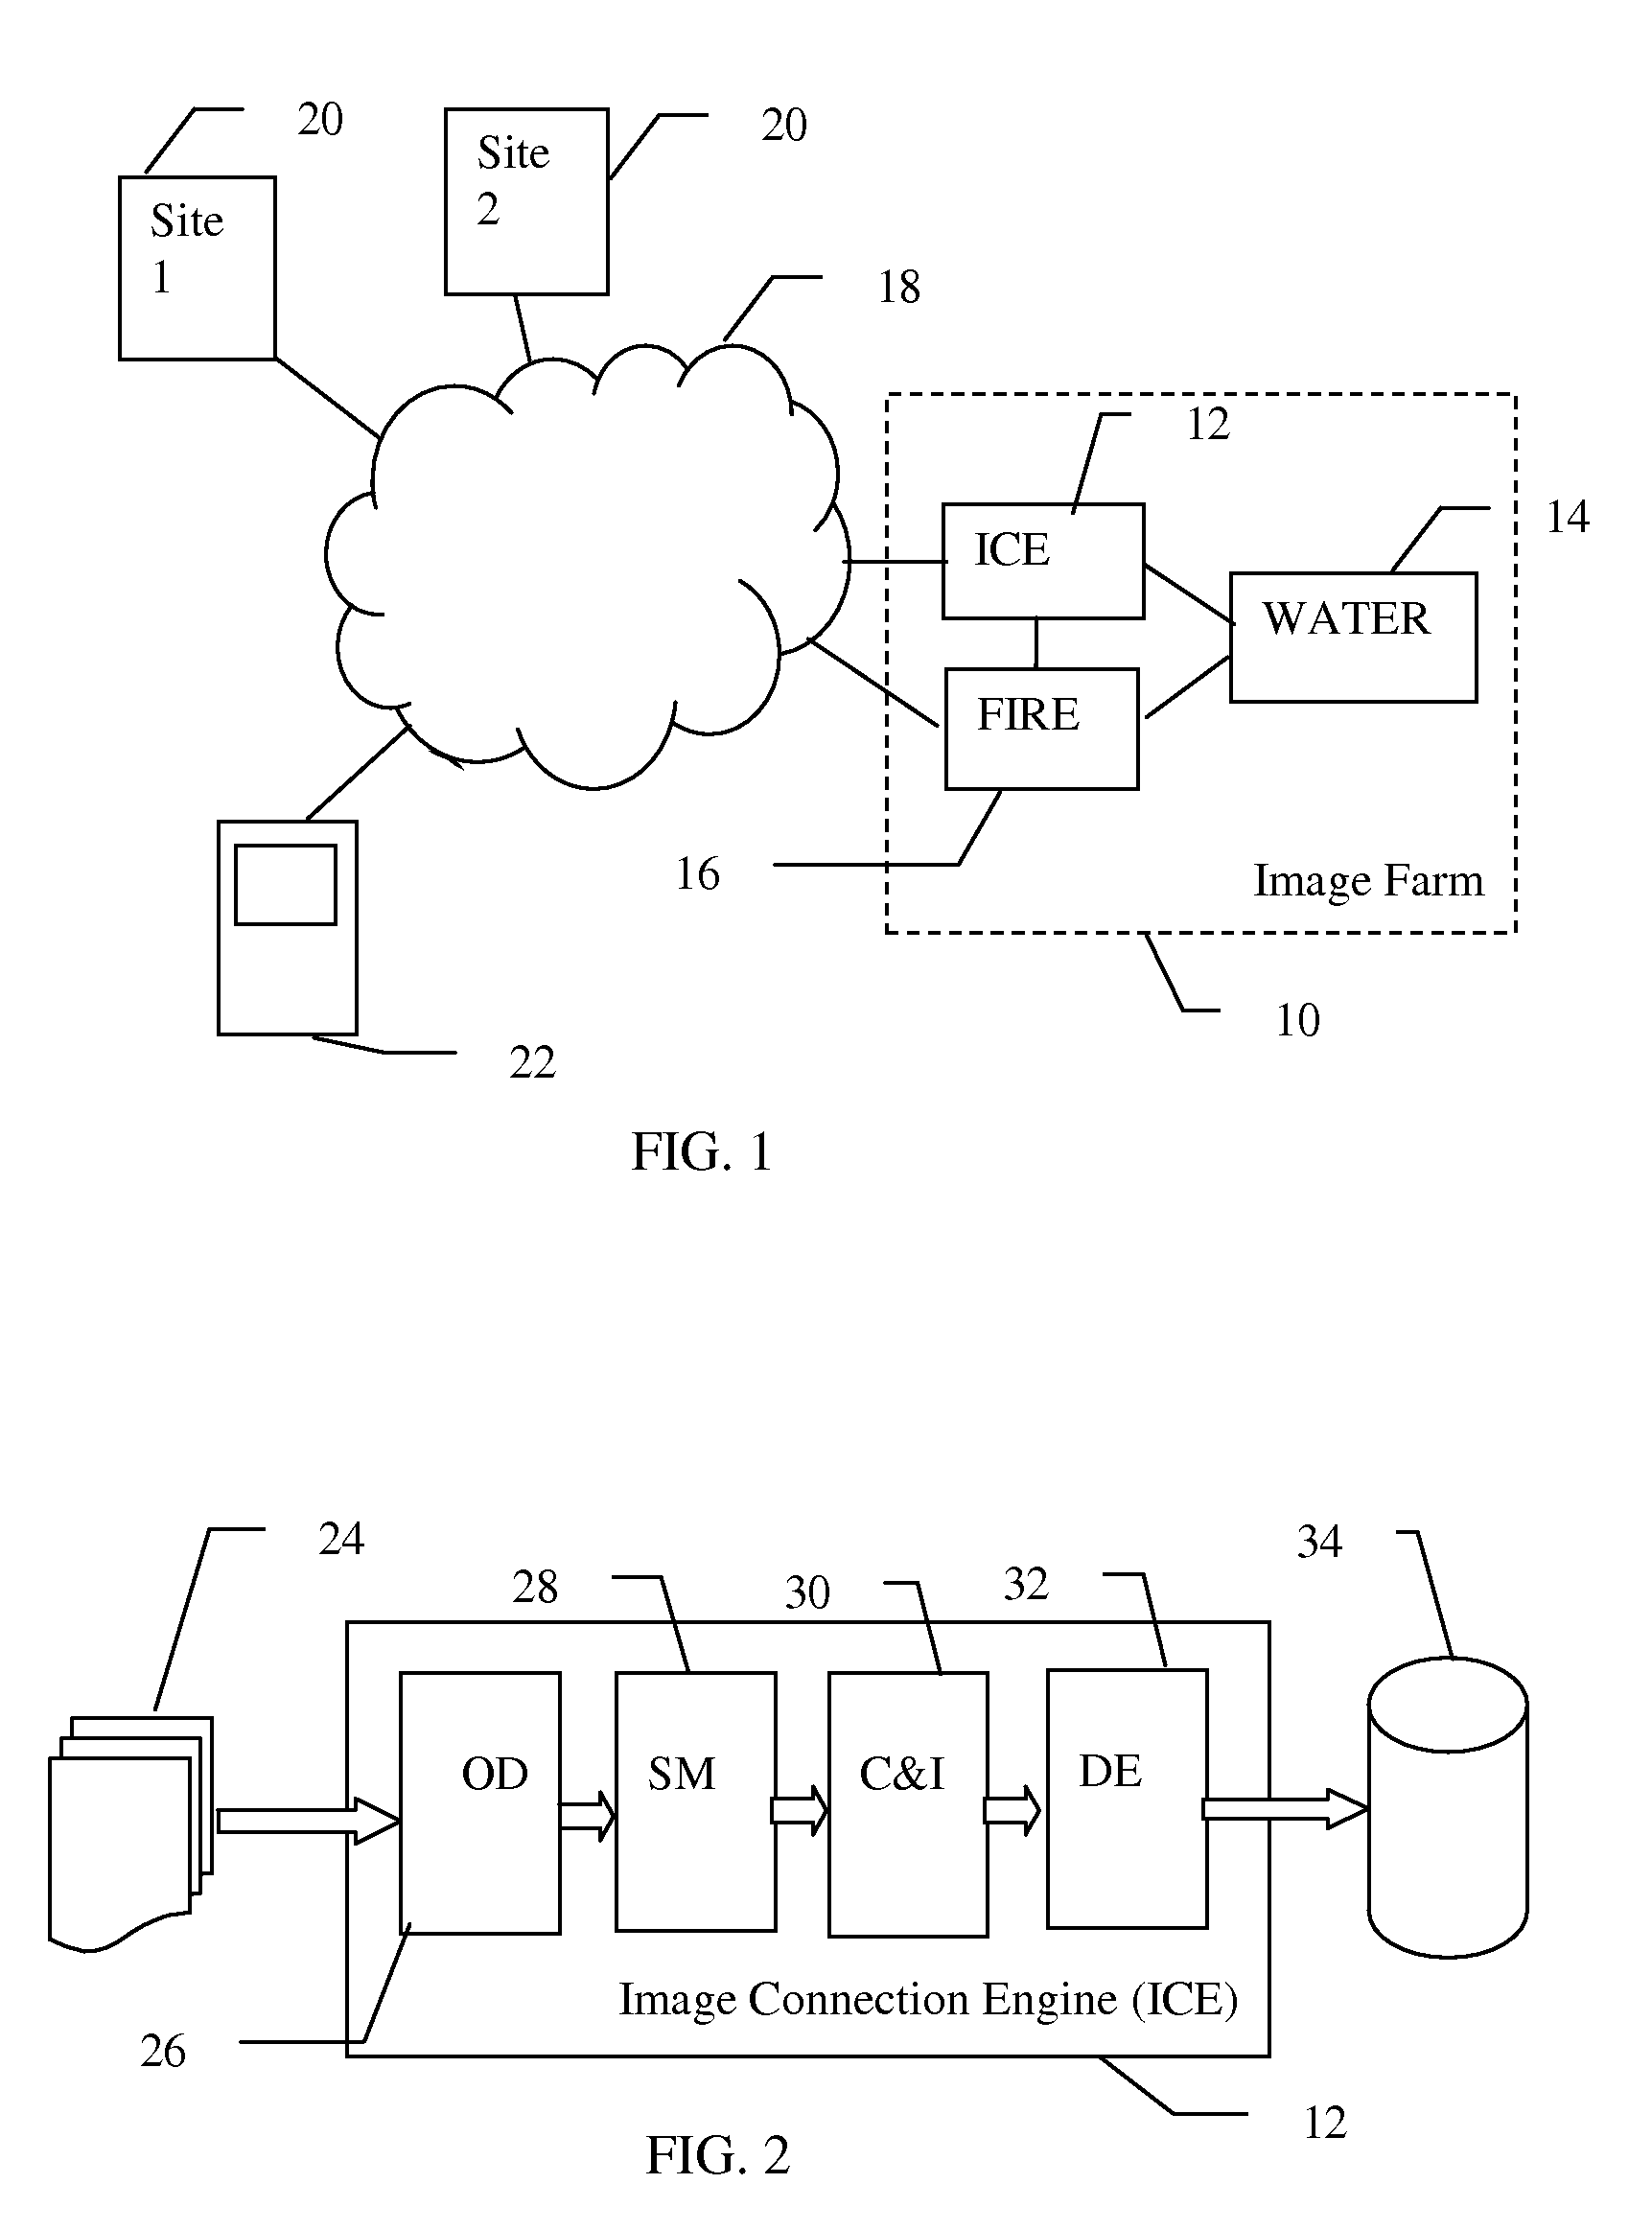 System and Method for Searching Multimedia using Exemplar Images